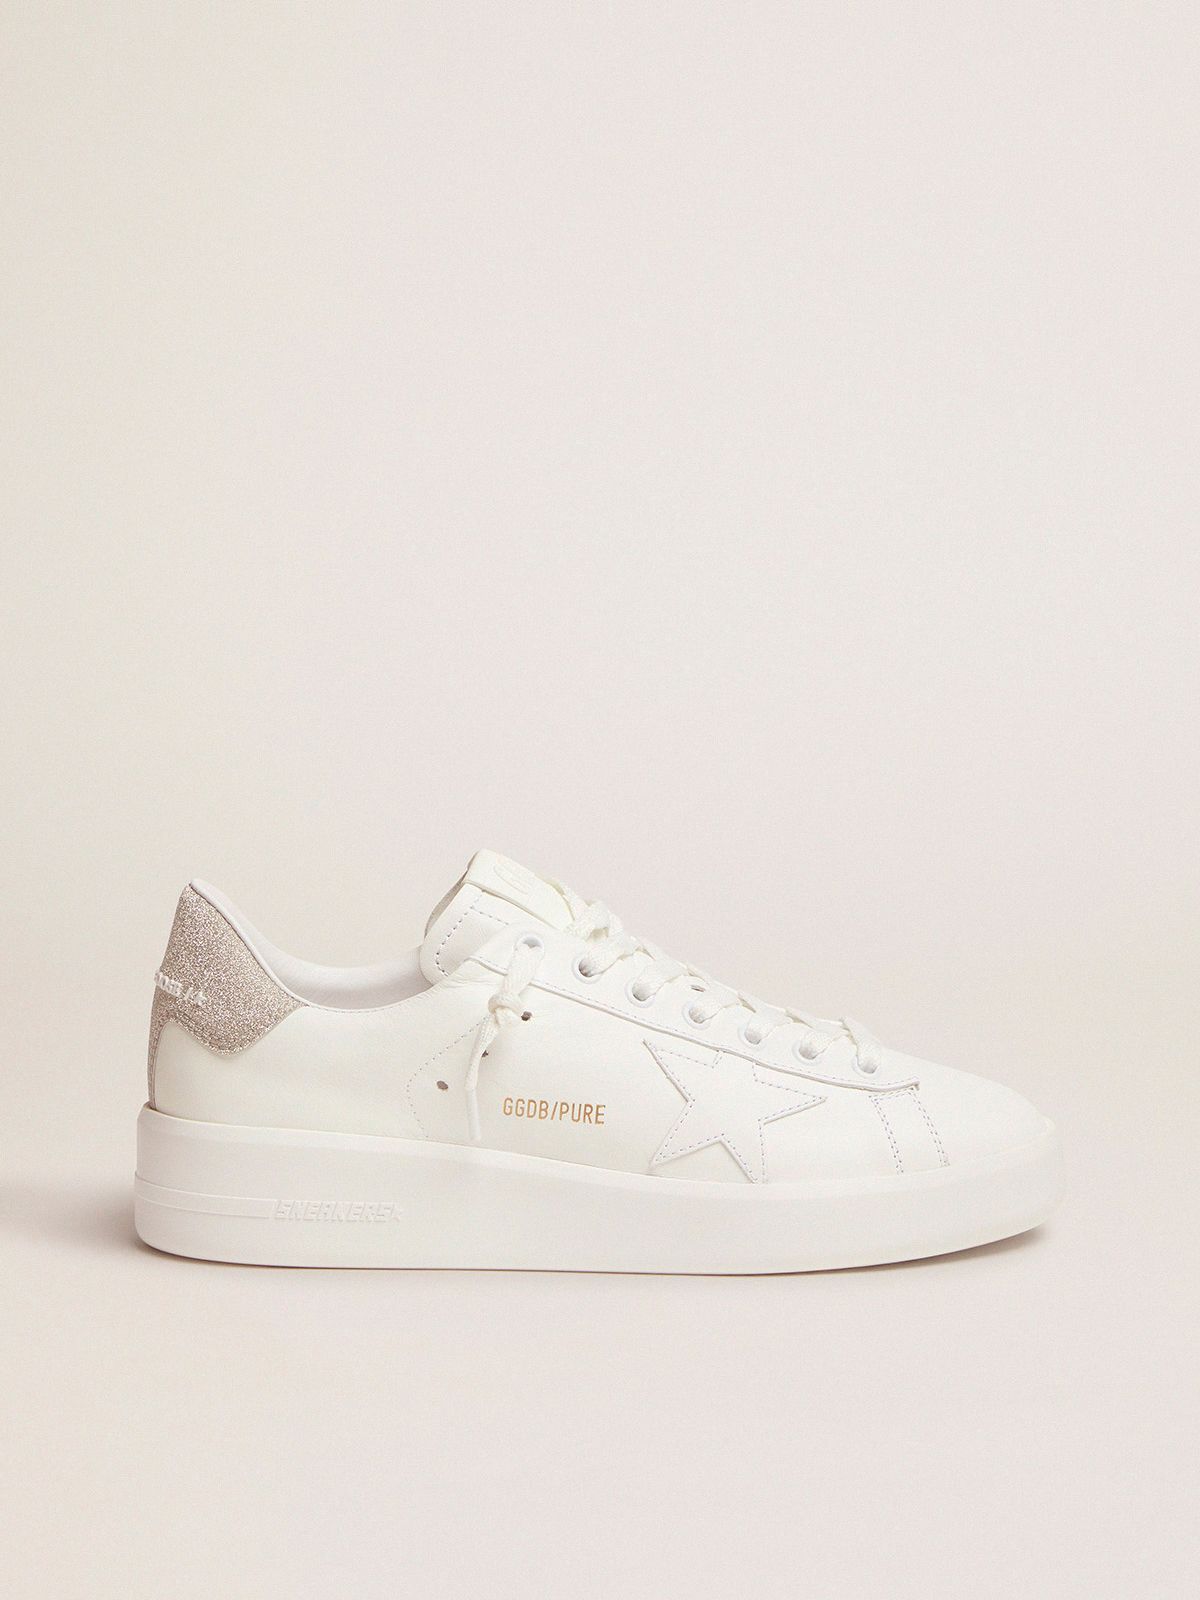 Purestar sneakers in white leather with champagne glitter heel tab